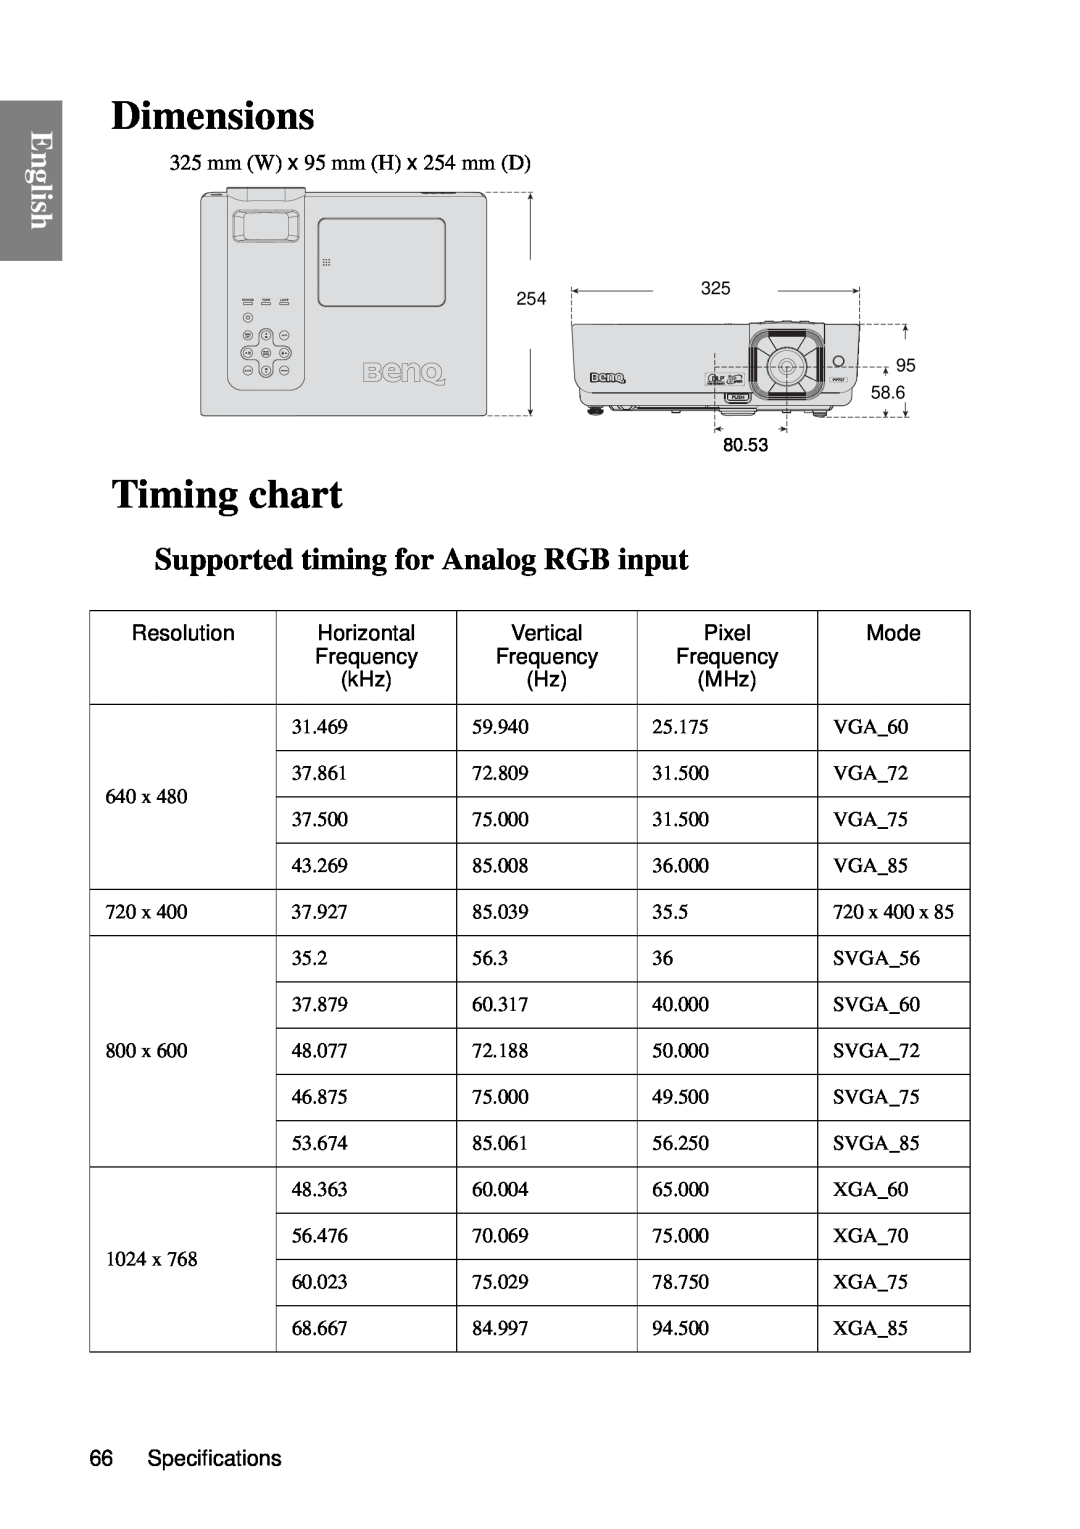 BenQ MP735, MP727 user manual Dimensions, Timing chart, Supported timing for Analog RGB input, English 